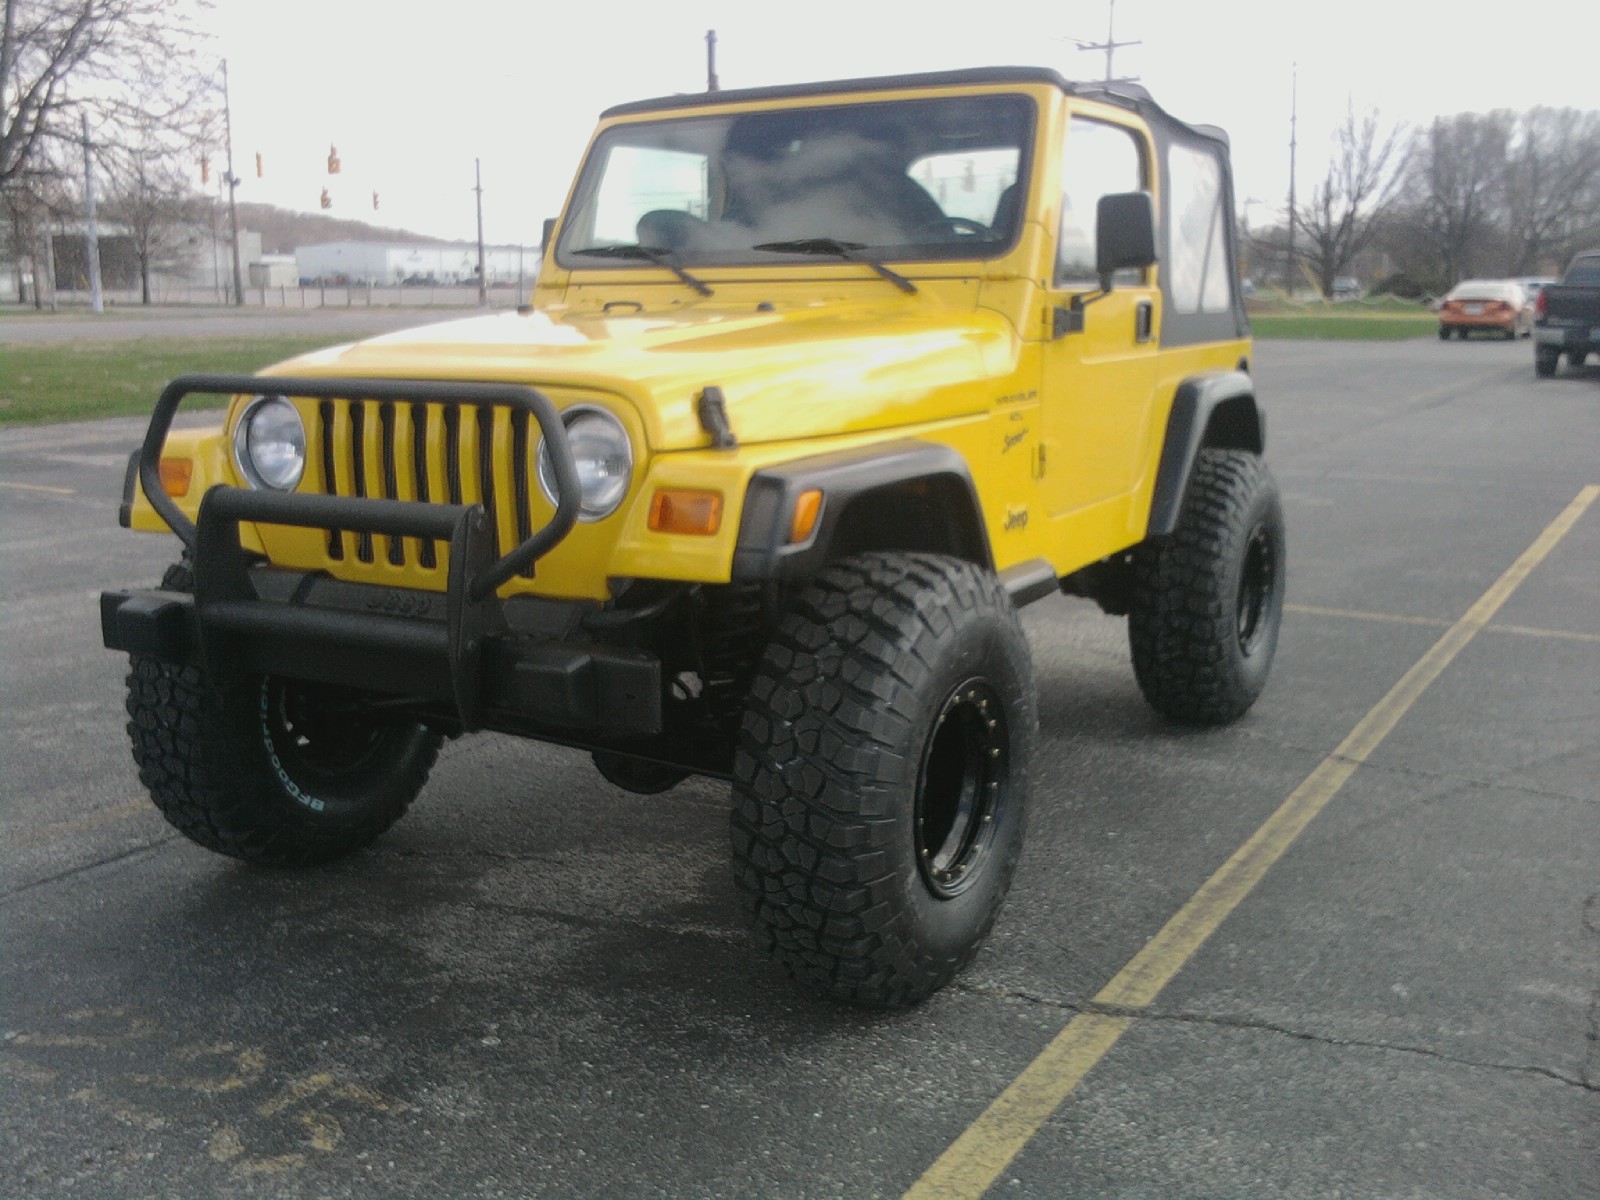 2001 Jeep Wrangler Lifted on